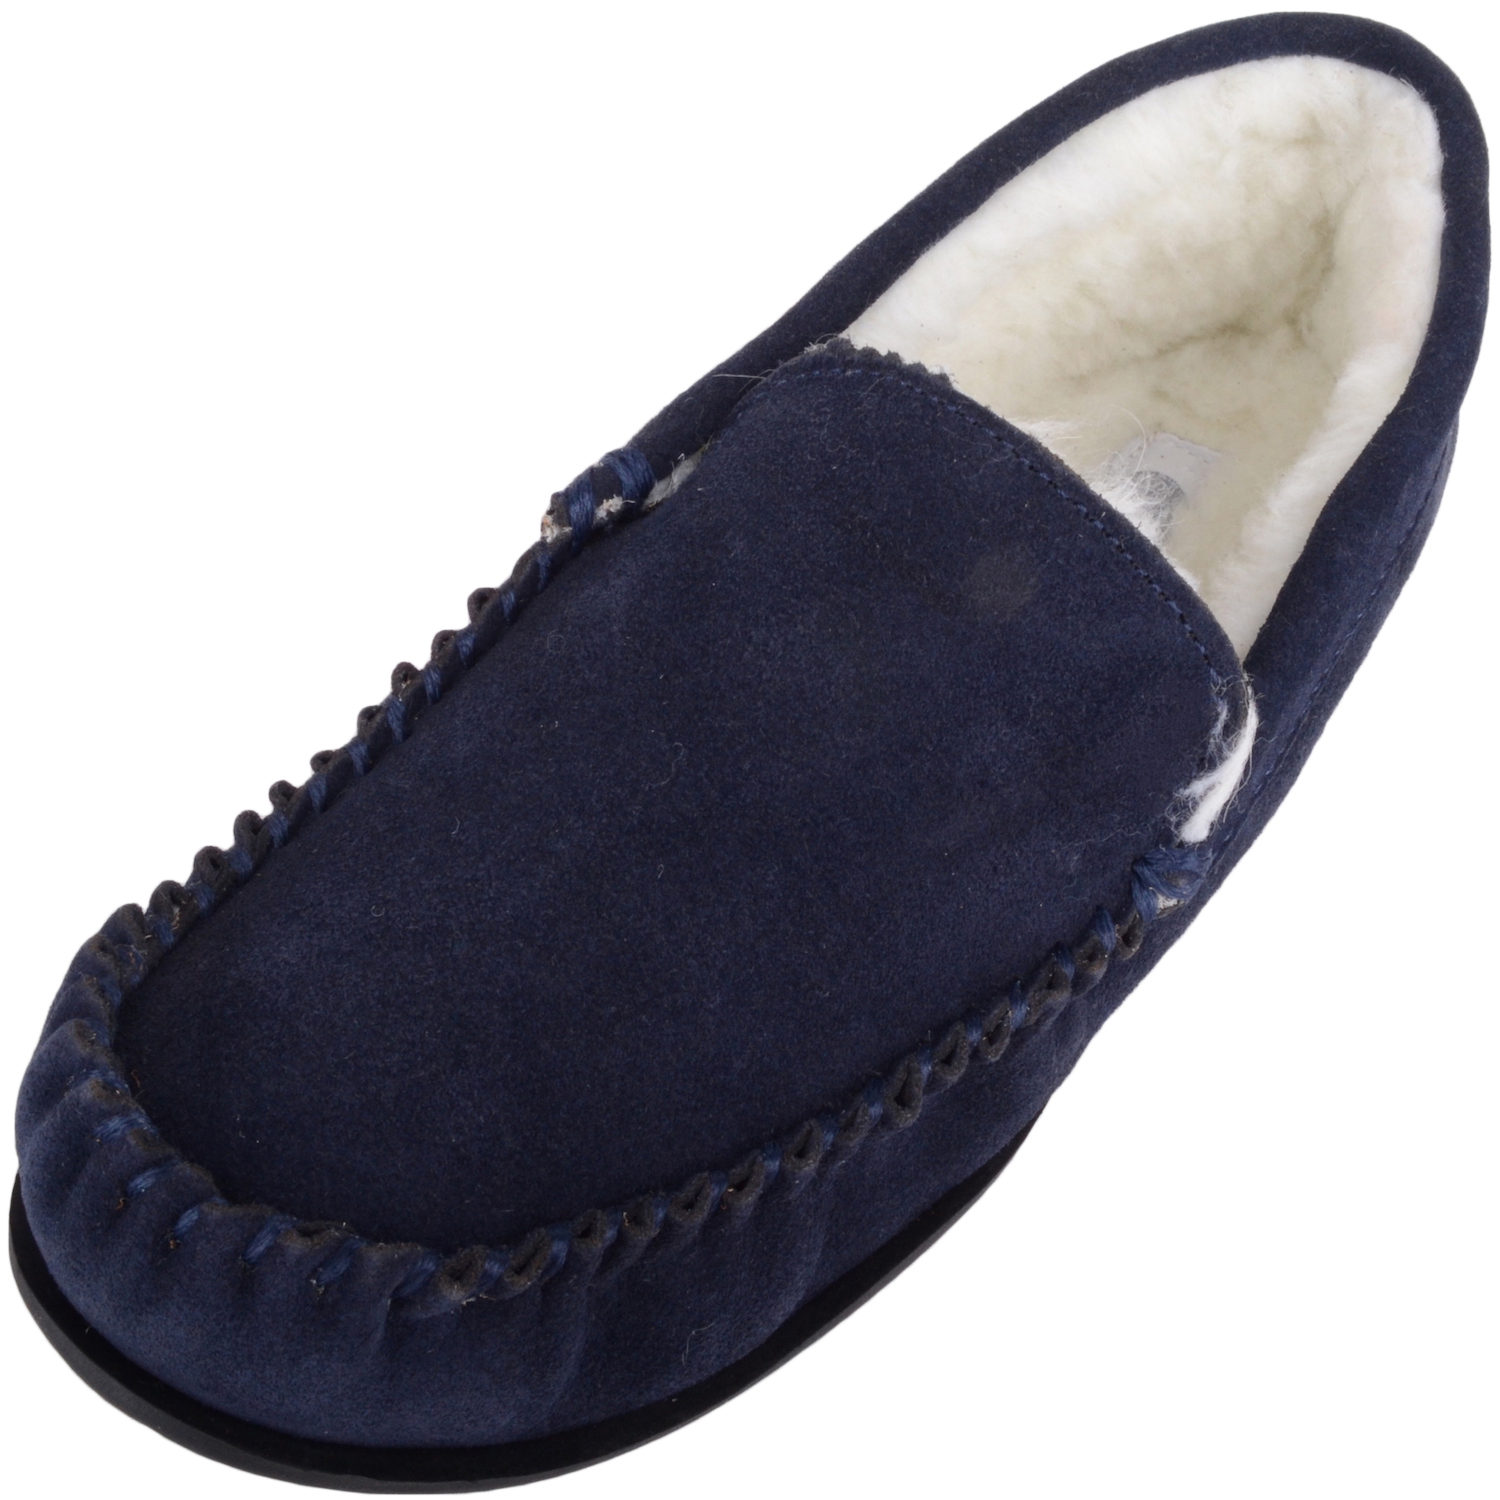 wool lined moccasin slippers